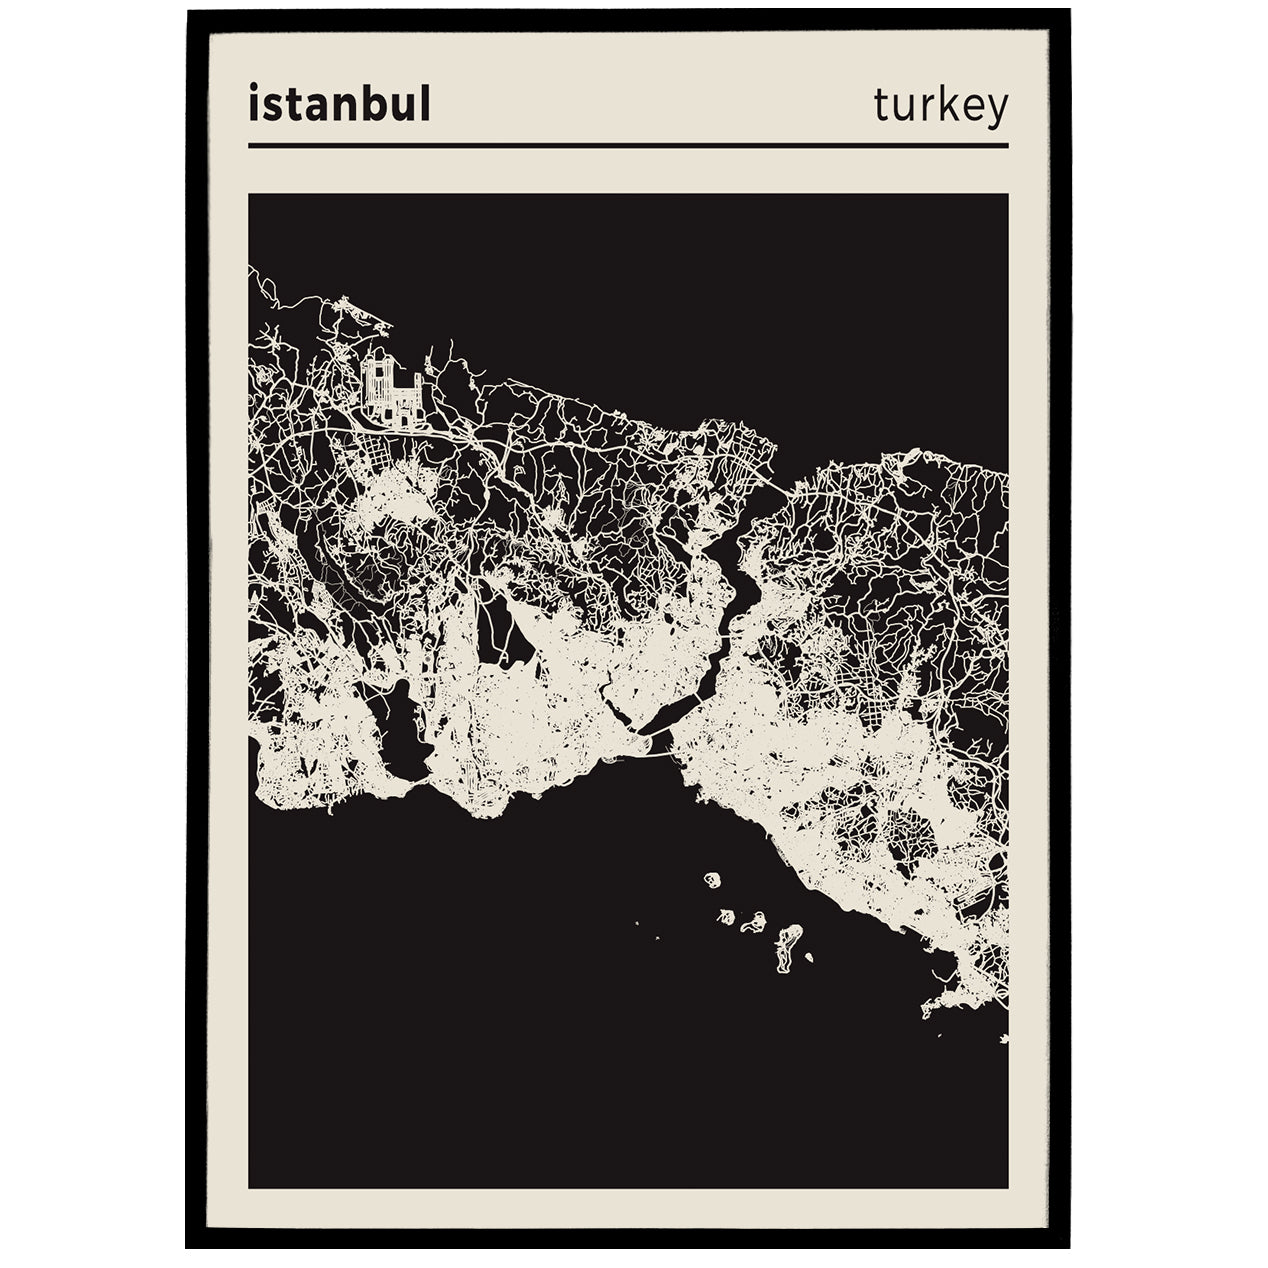 Istanbul, Turkey - City Map Poster